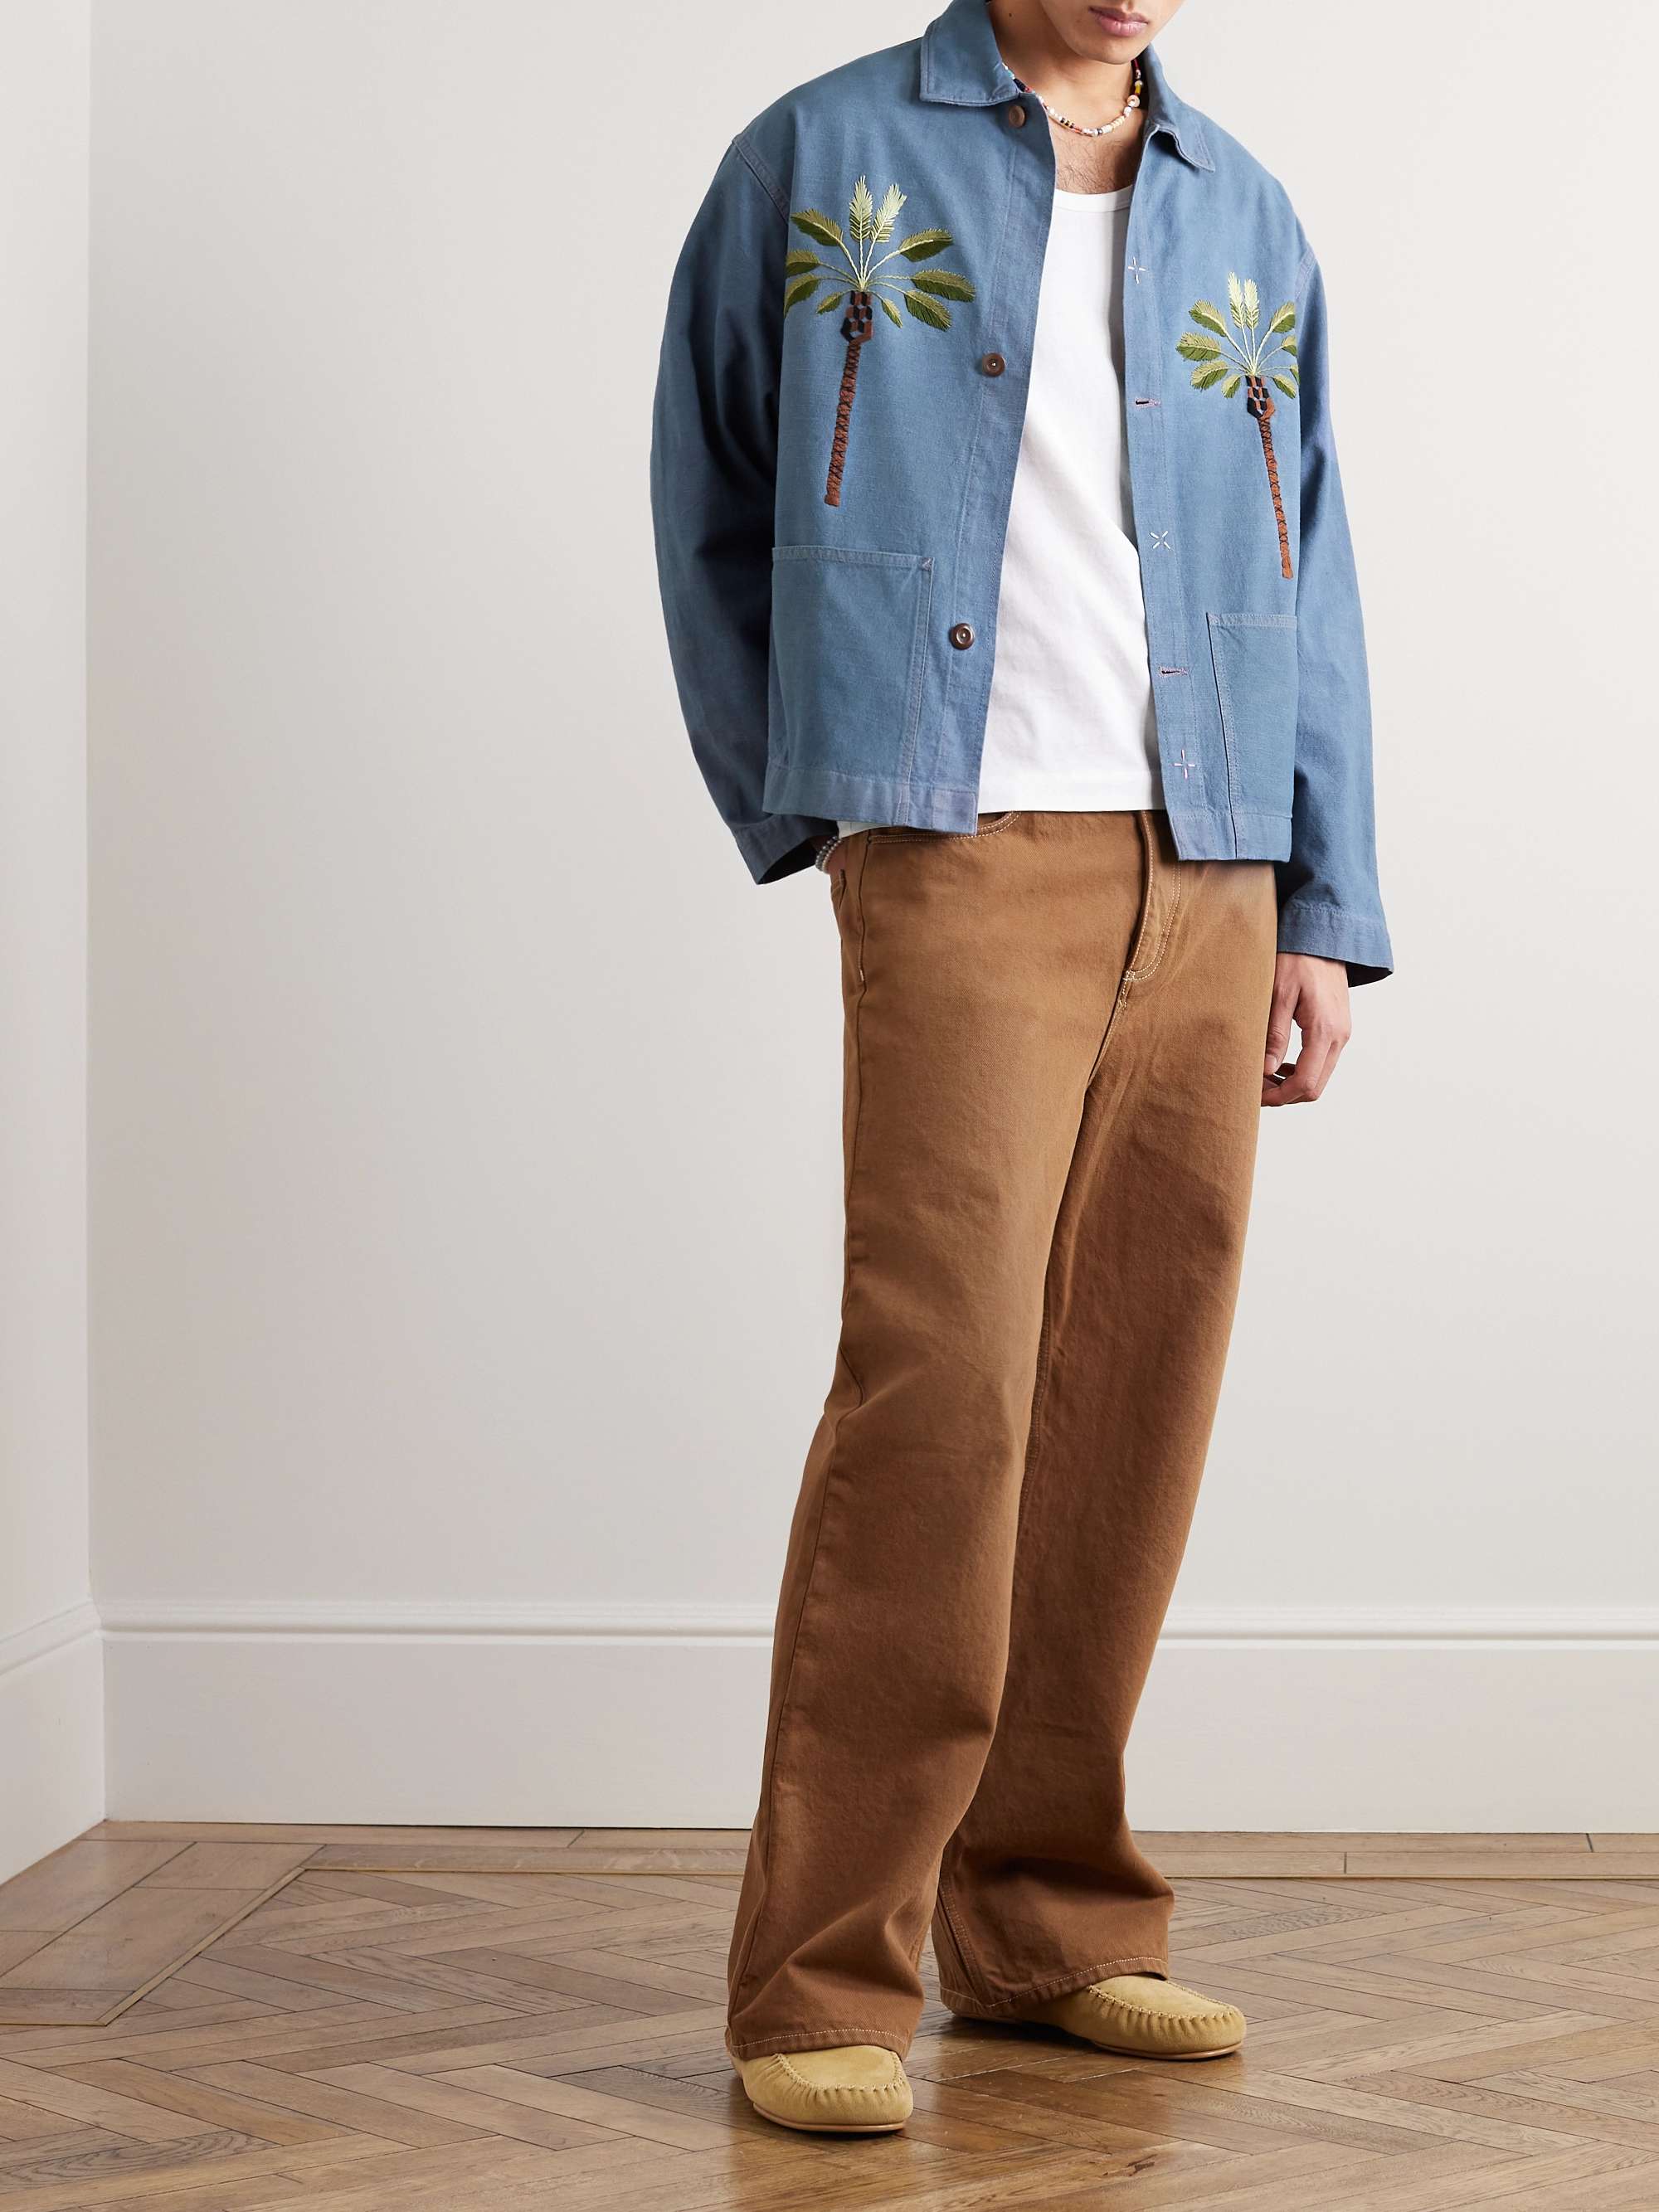 STORY MFG. Short On Time Embroidered Organic Cotton-Chambray Jacket